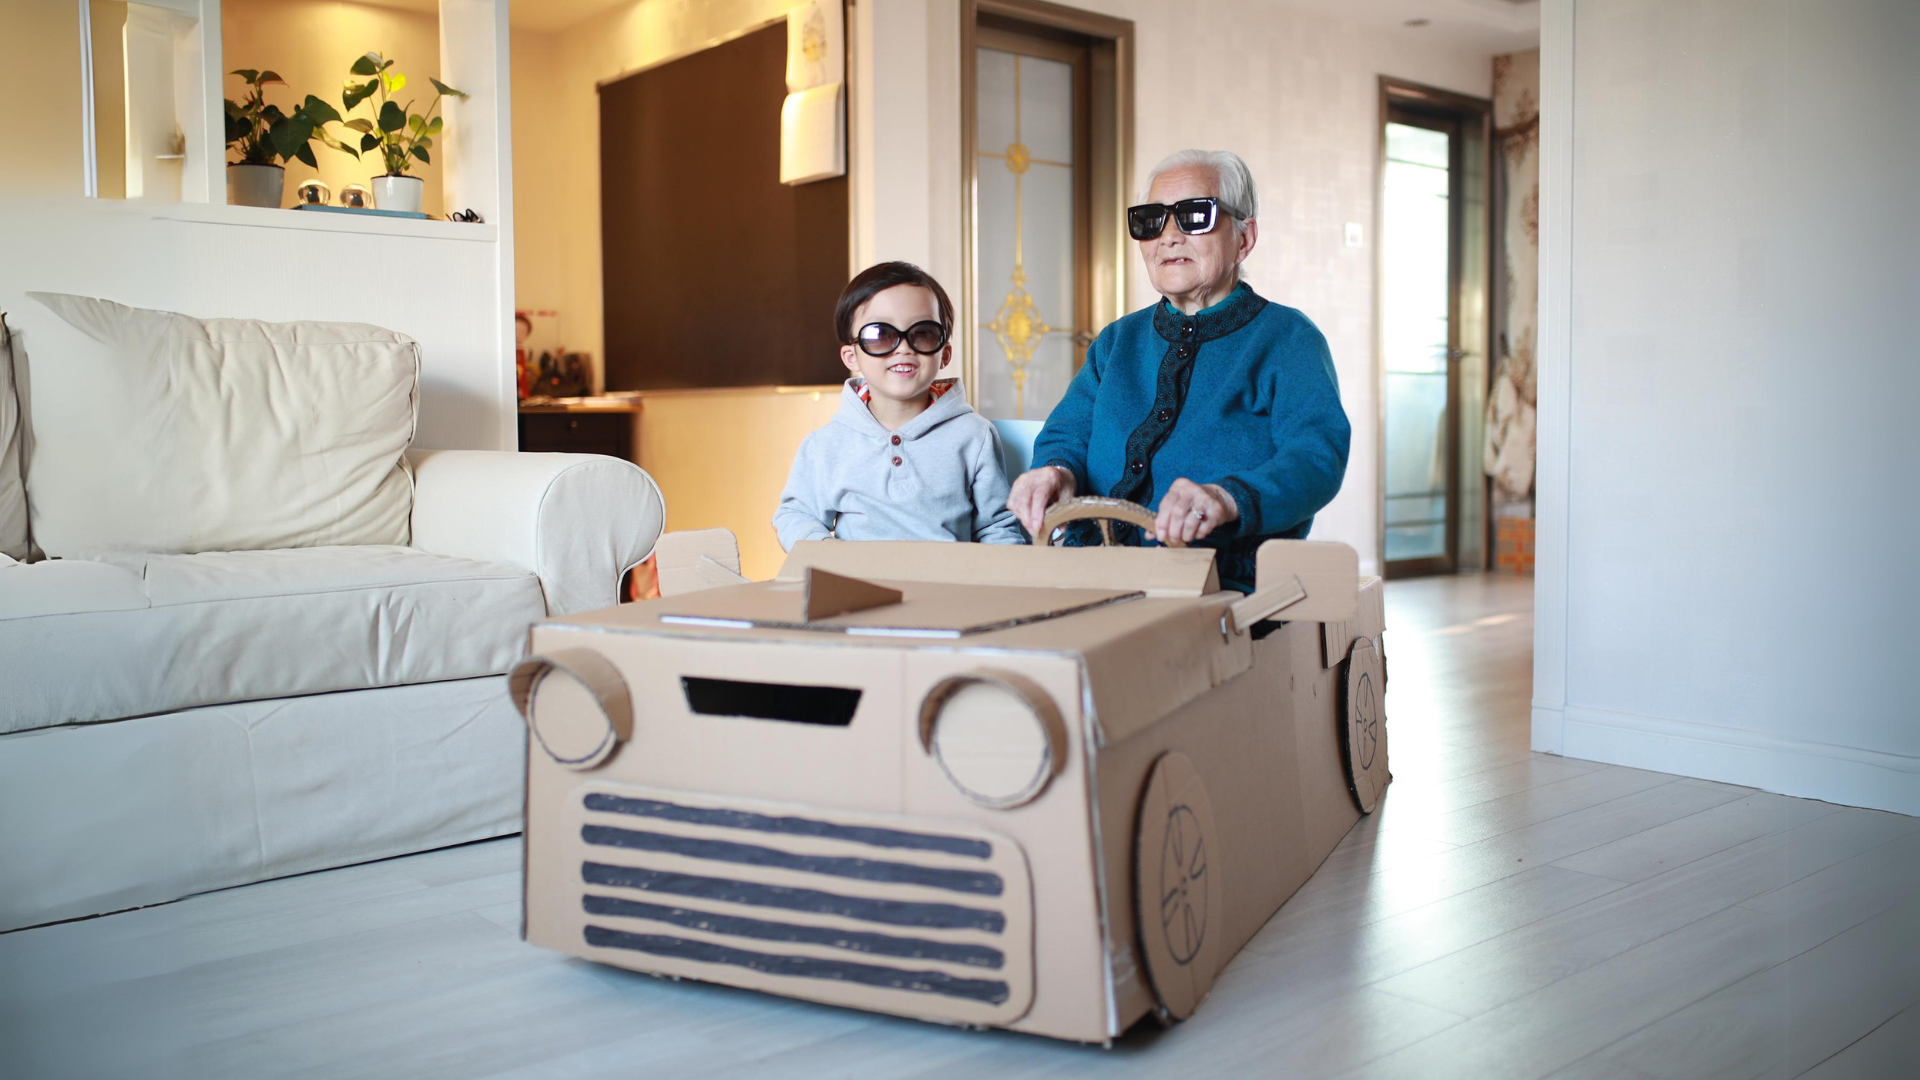 An older adult and a young child wear sunglasses while sitting in a cardboard car in a living room.